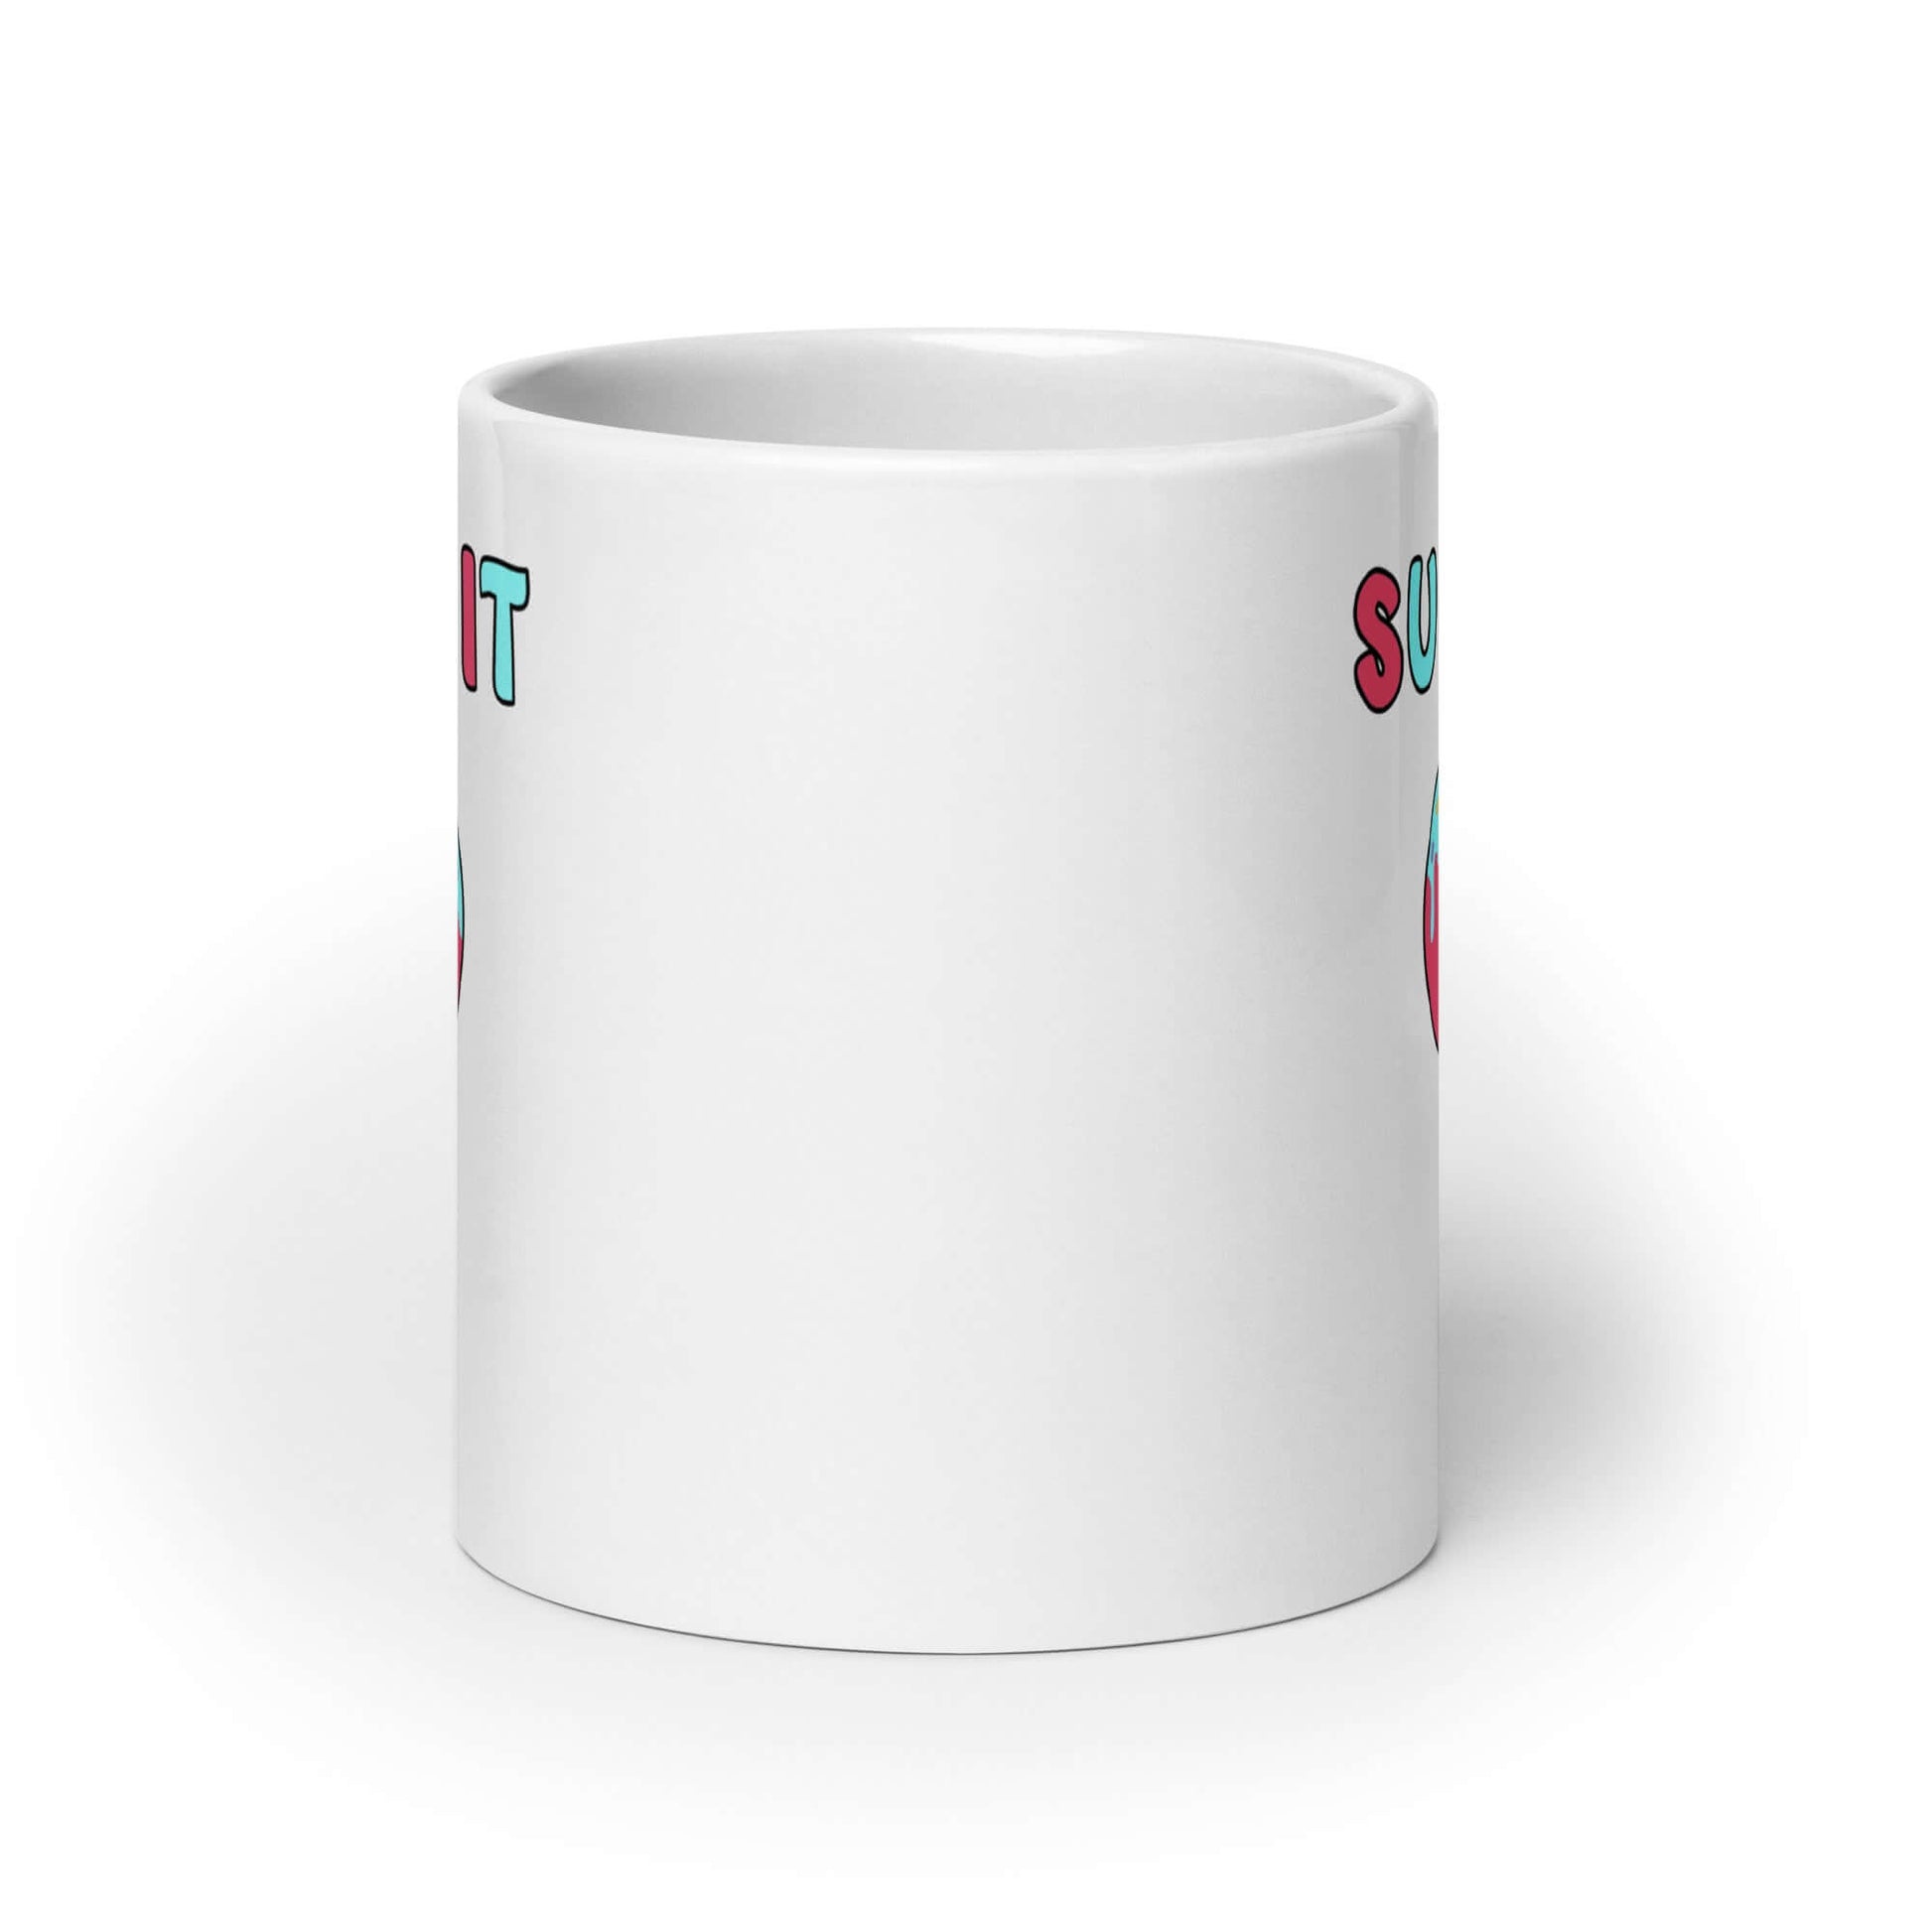 White ceramic mug with graphics of a kawaii style lollipop with the words Suck it printed on both sides.